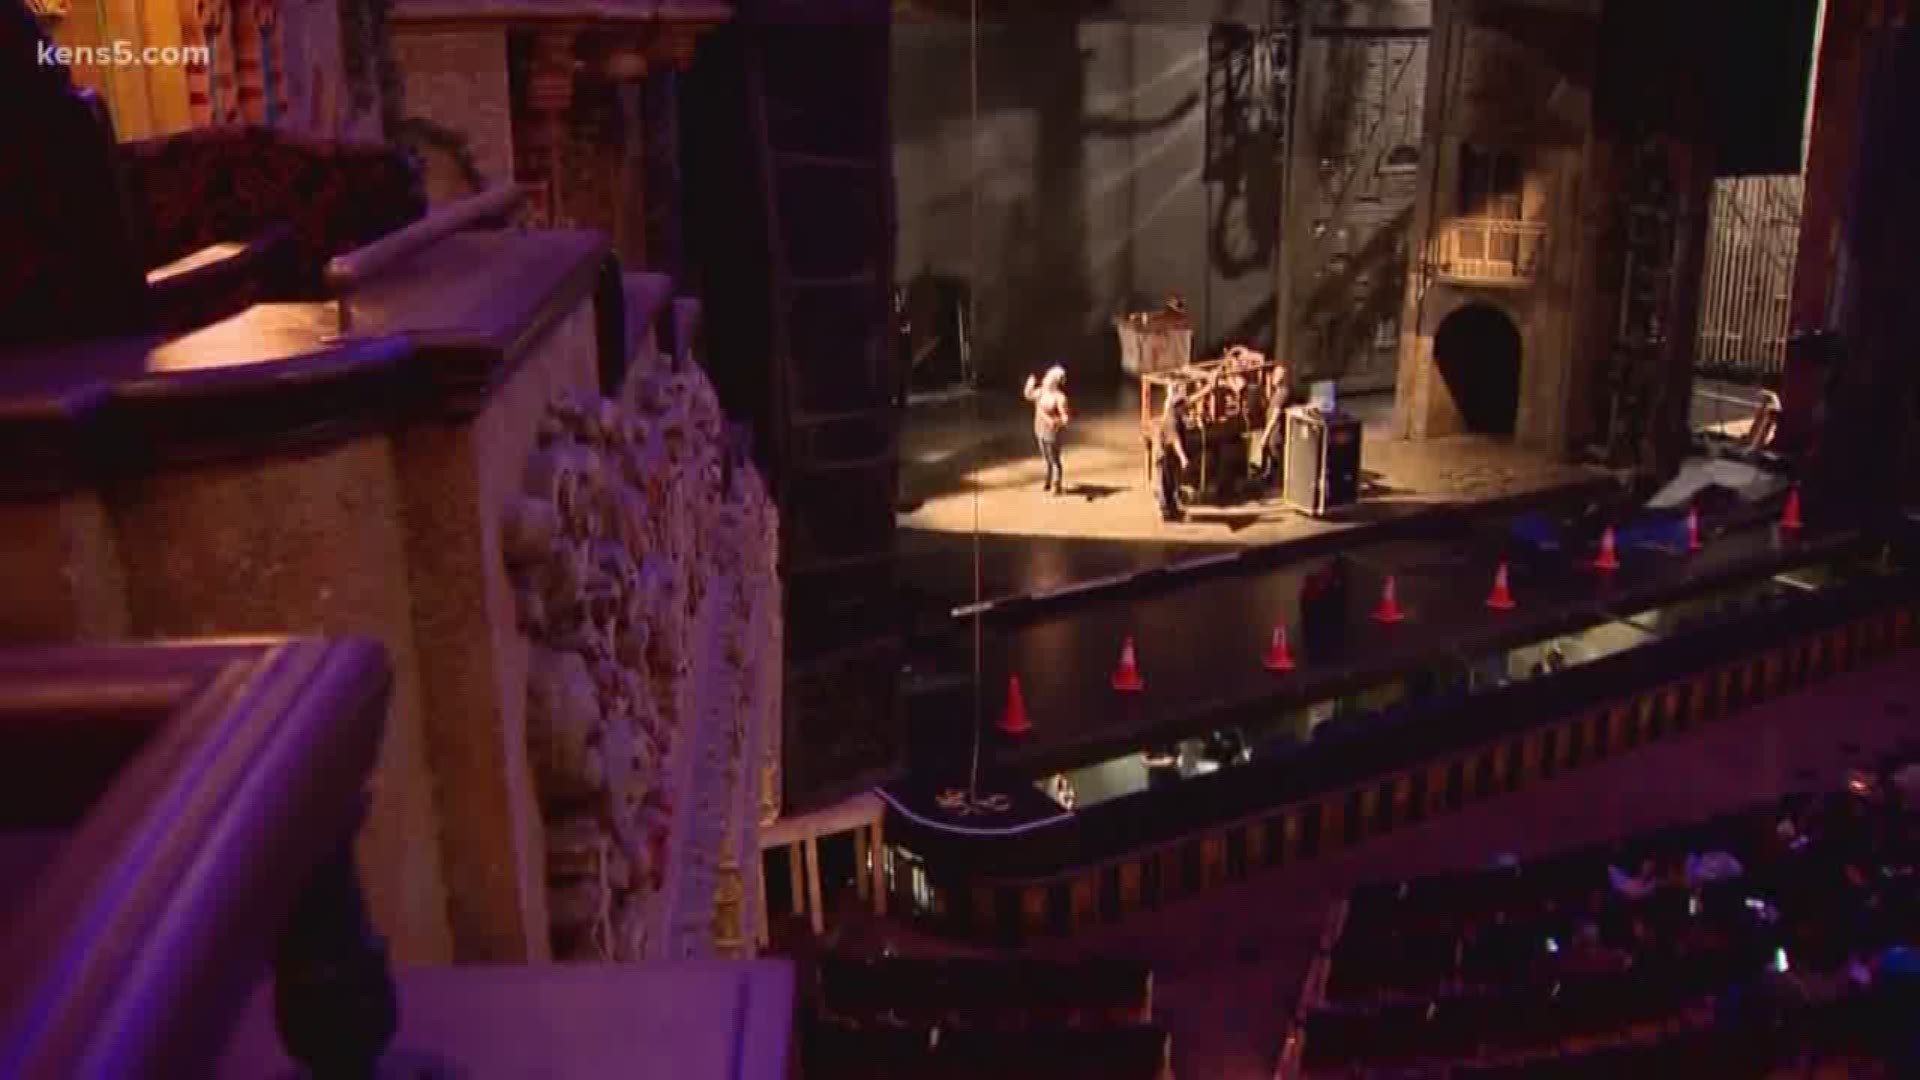 The longest running Broadway show, Les Misérables, opened Tuesday the Majestic Theatre. KENS 5 took a rare look behind the curtain.